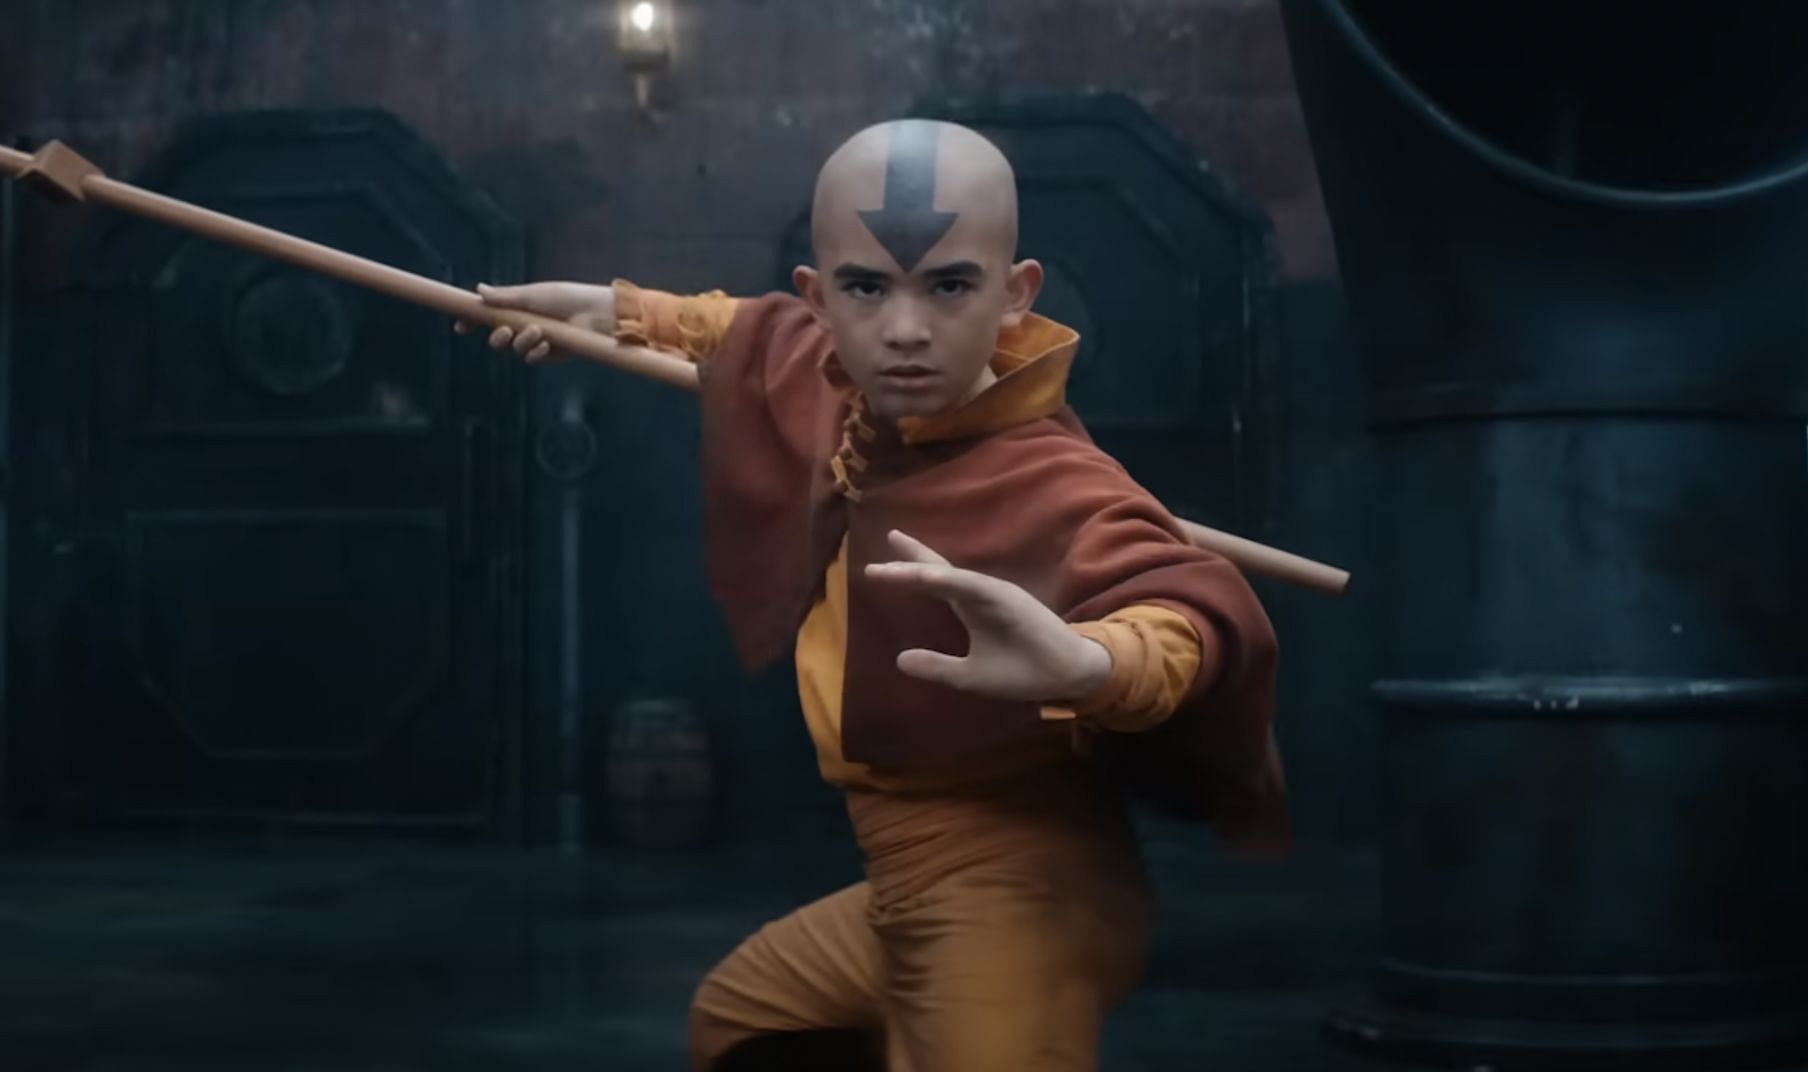 A still of Aang from the show. (Image via Netflix)